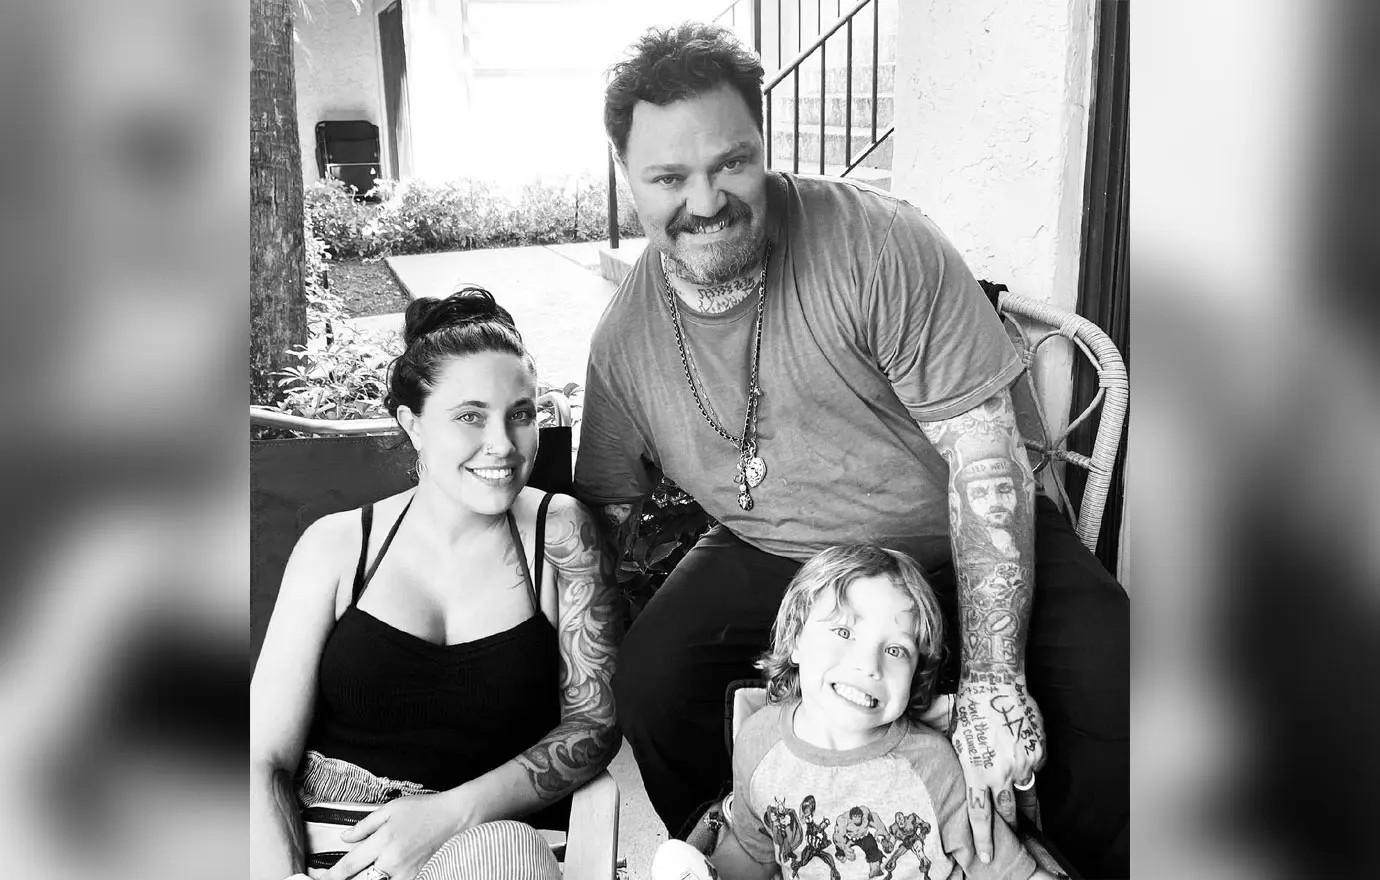 Bam Margera Cut Off From Contact With Son Phoenix After Arrest pic picture